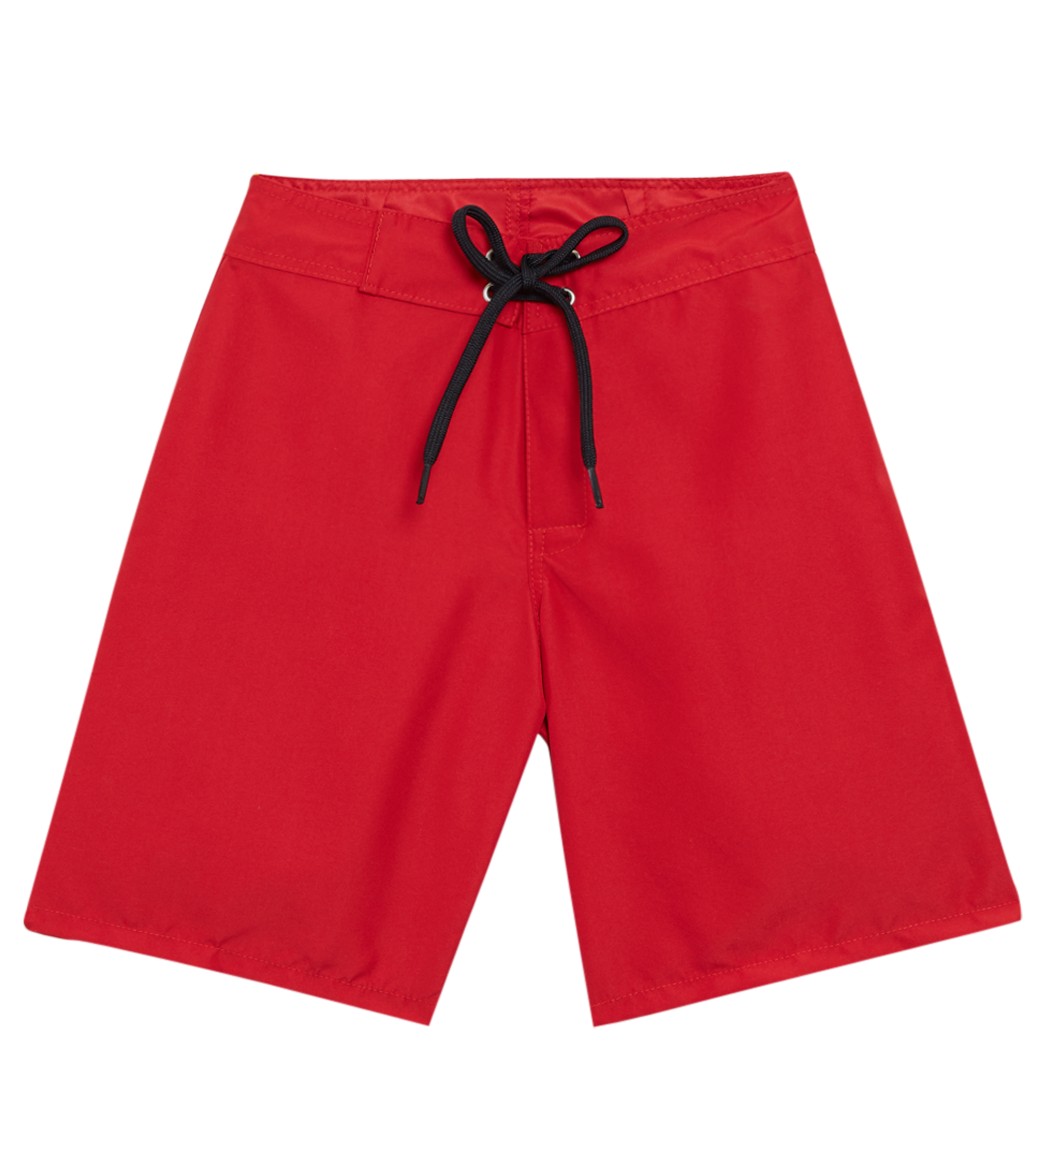 Tidepools Boys' Solid Surf Trunks Big Kid - Red 8 Polyester - Swimoutlet.com